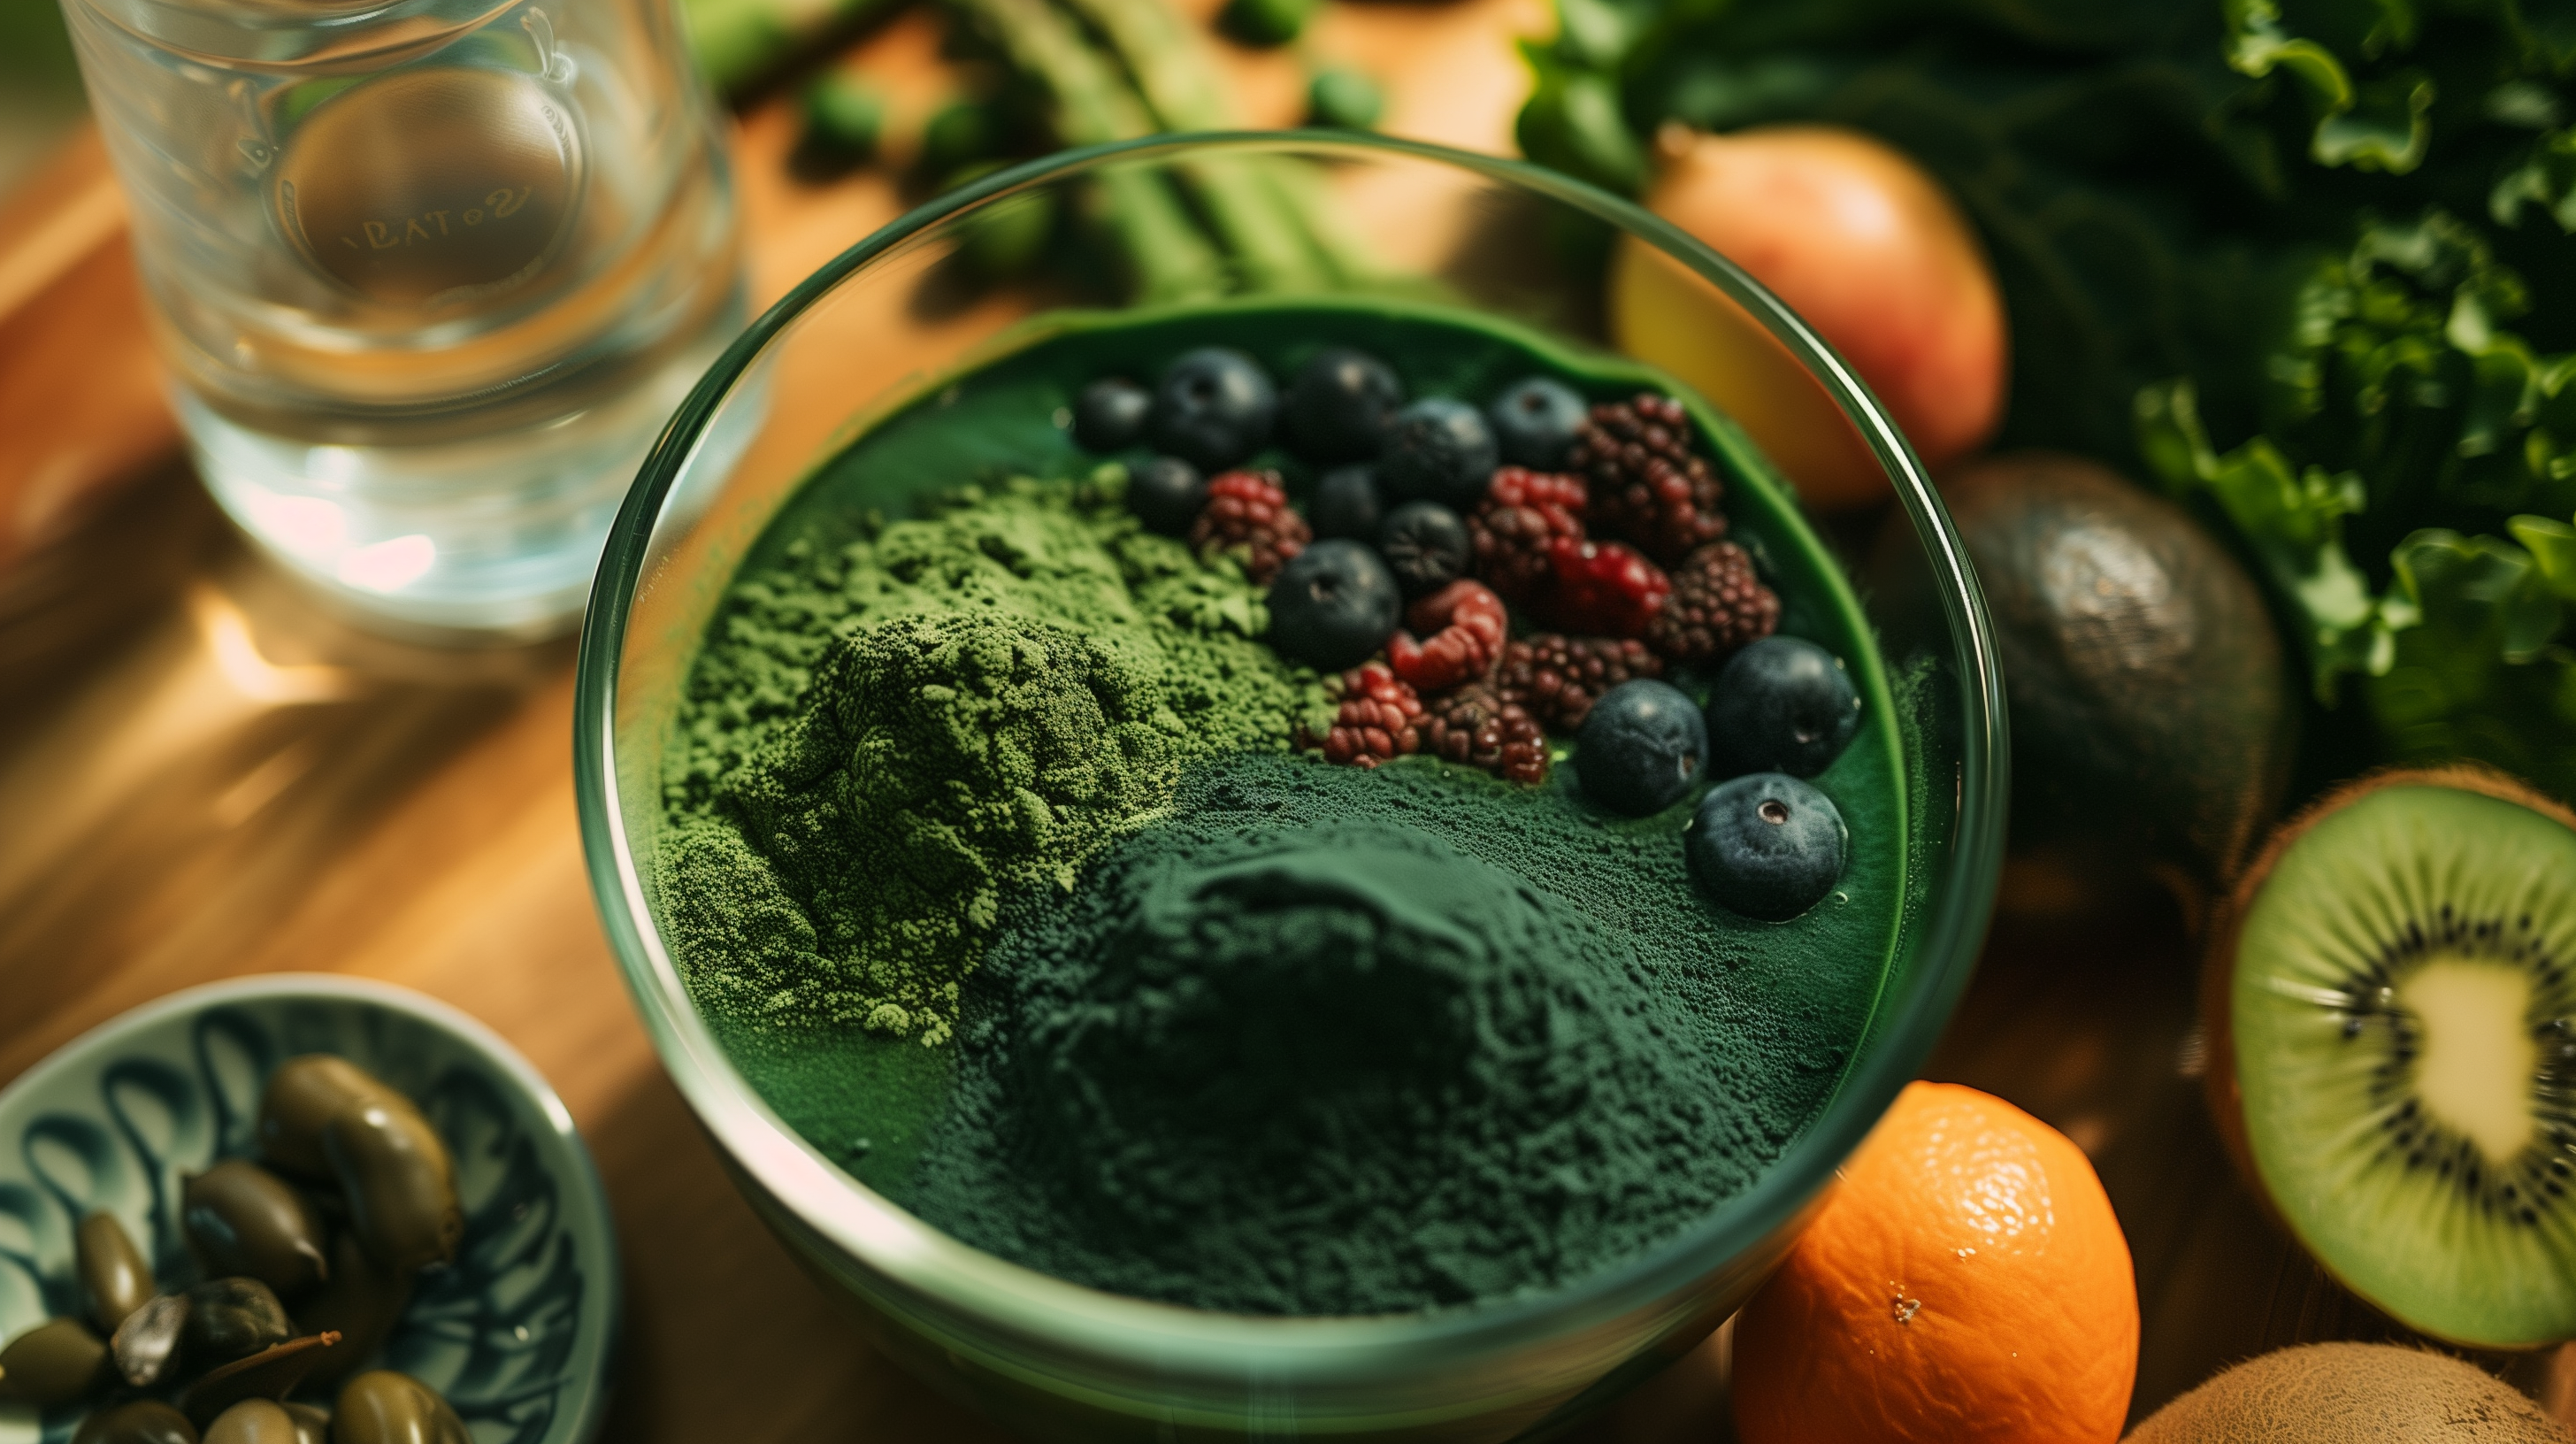 vibrant greens powder in a blending bowl filled with fruits and vegetables